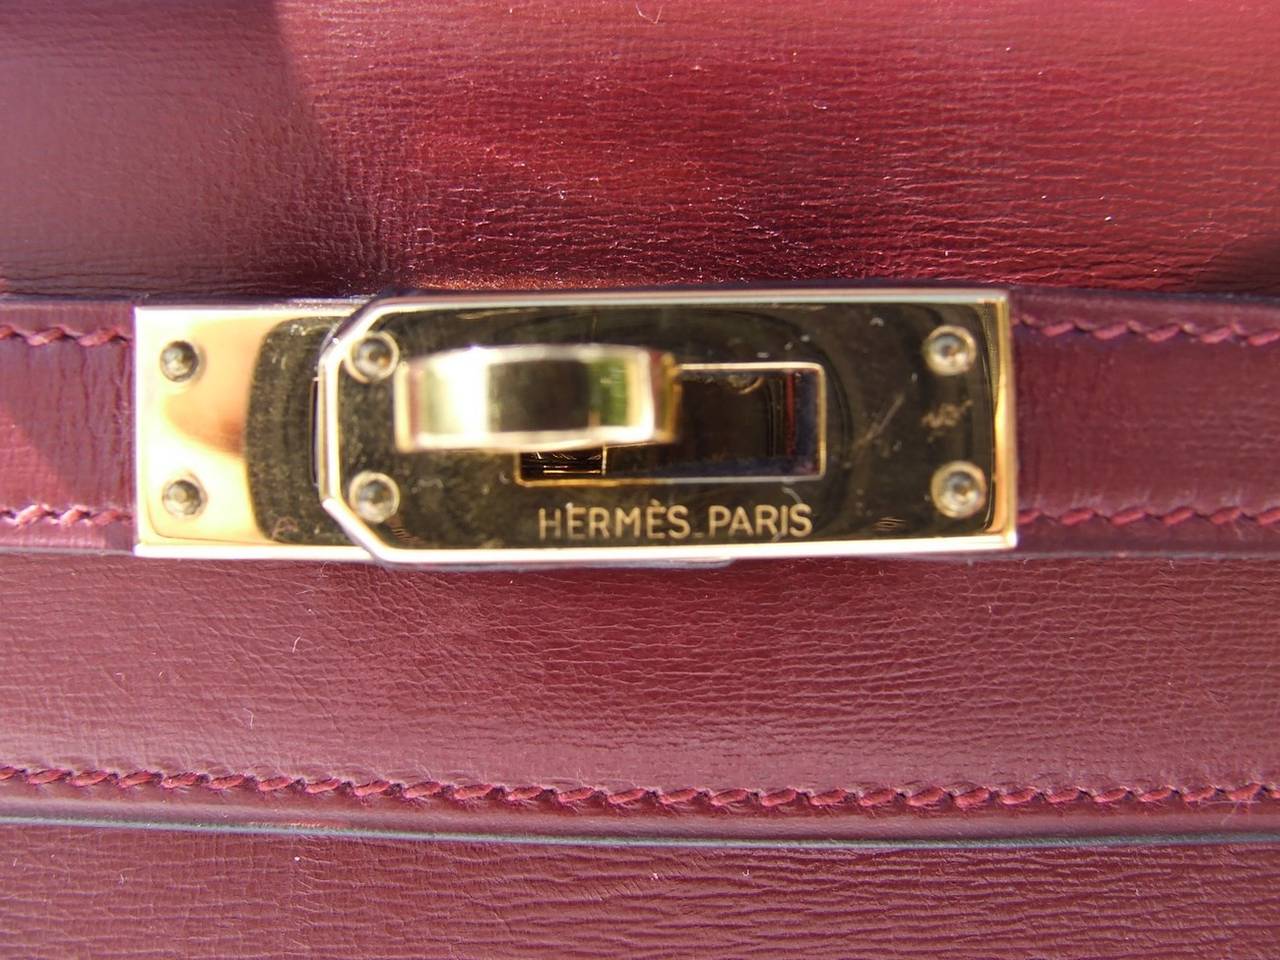 SUPER CUTE AUTHENTIC HERMES BAG

MINI KELLY

Sellier version

Made in France, stamp N in a circle

Made of Box leather and gold hardware

Colorway: Rouge (red)

Fully lined with red leather

Size: 20

Measurements: 20 x 14 x9,5 cm